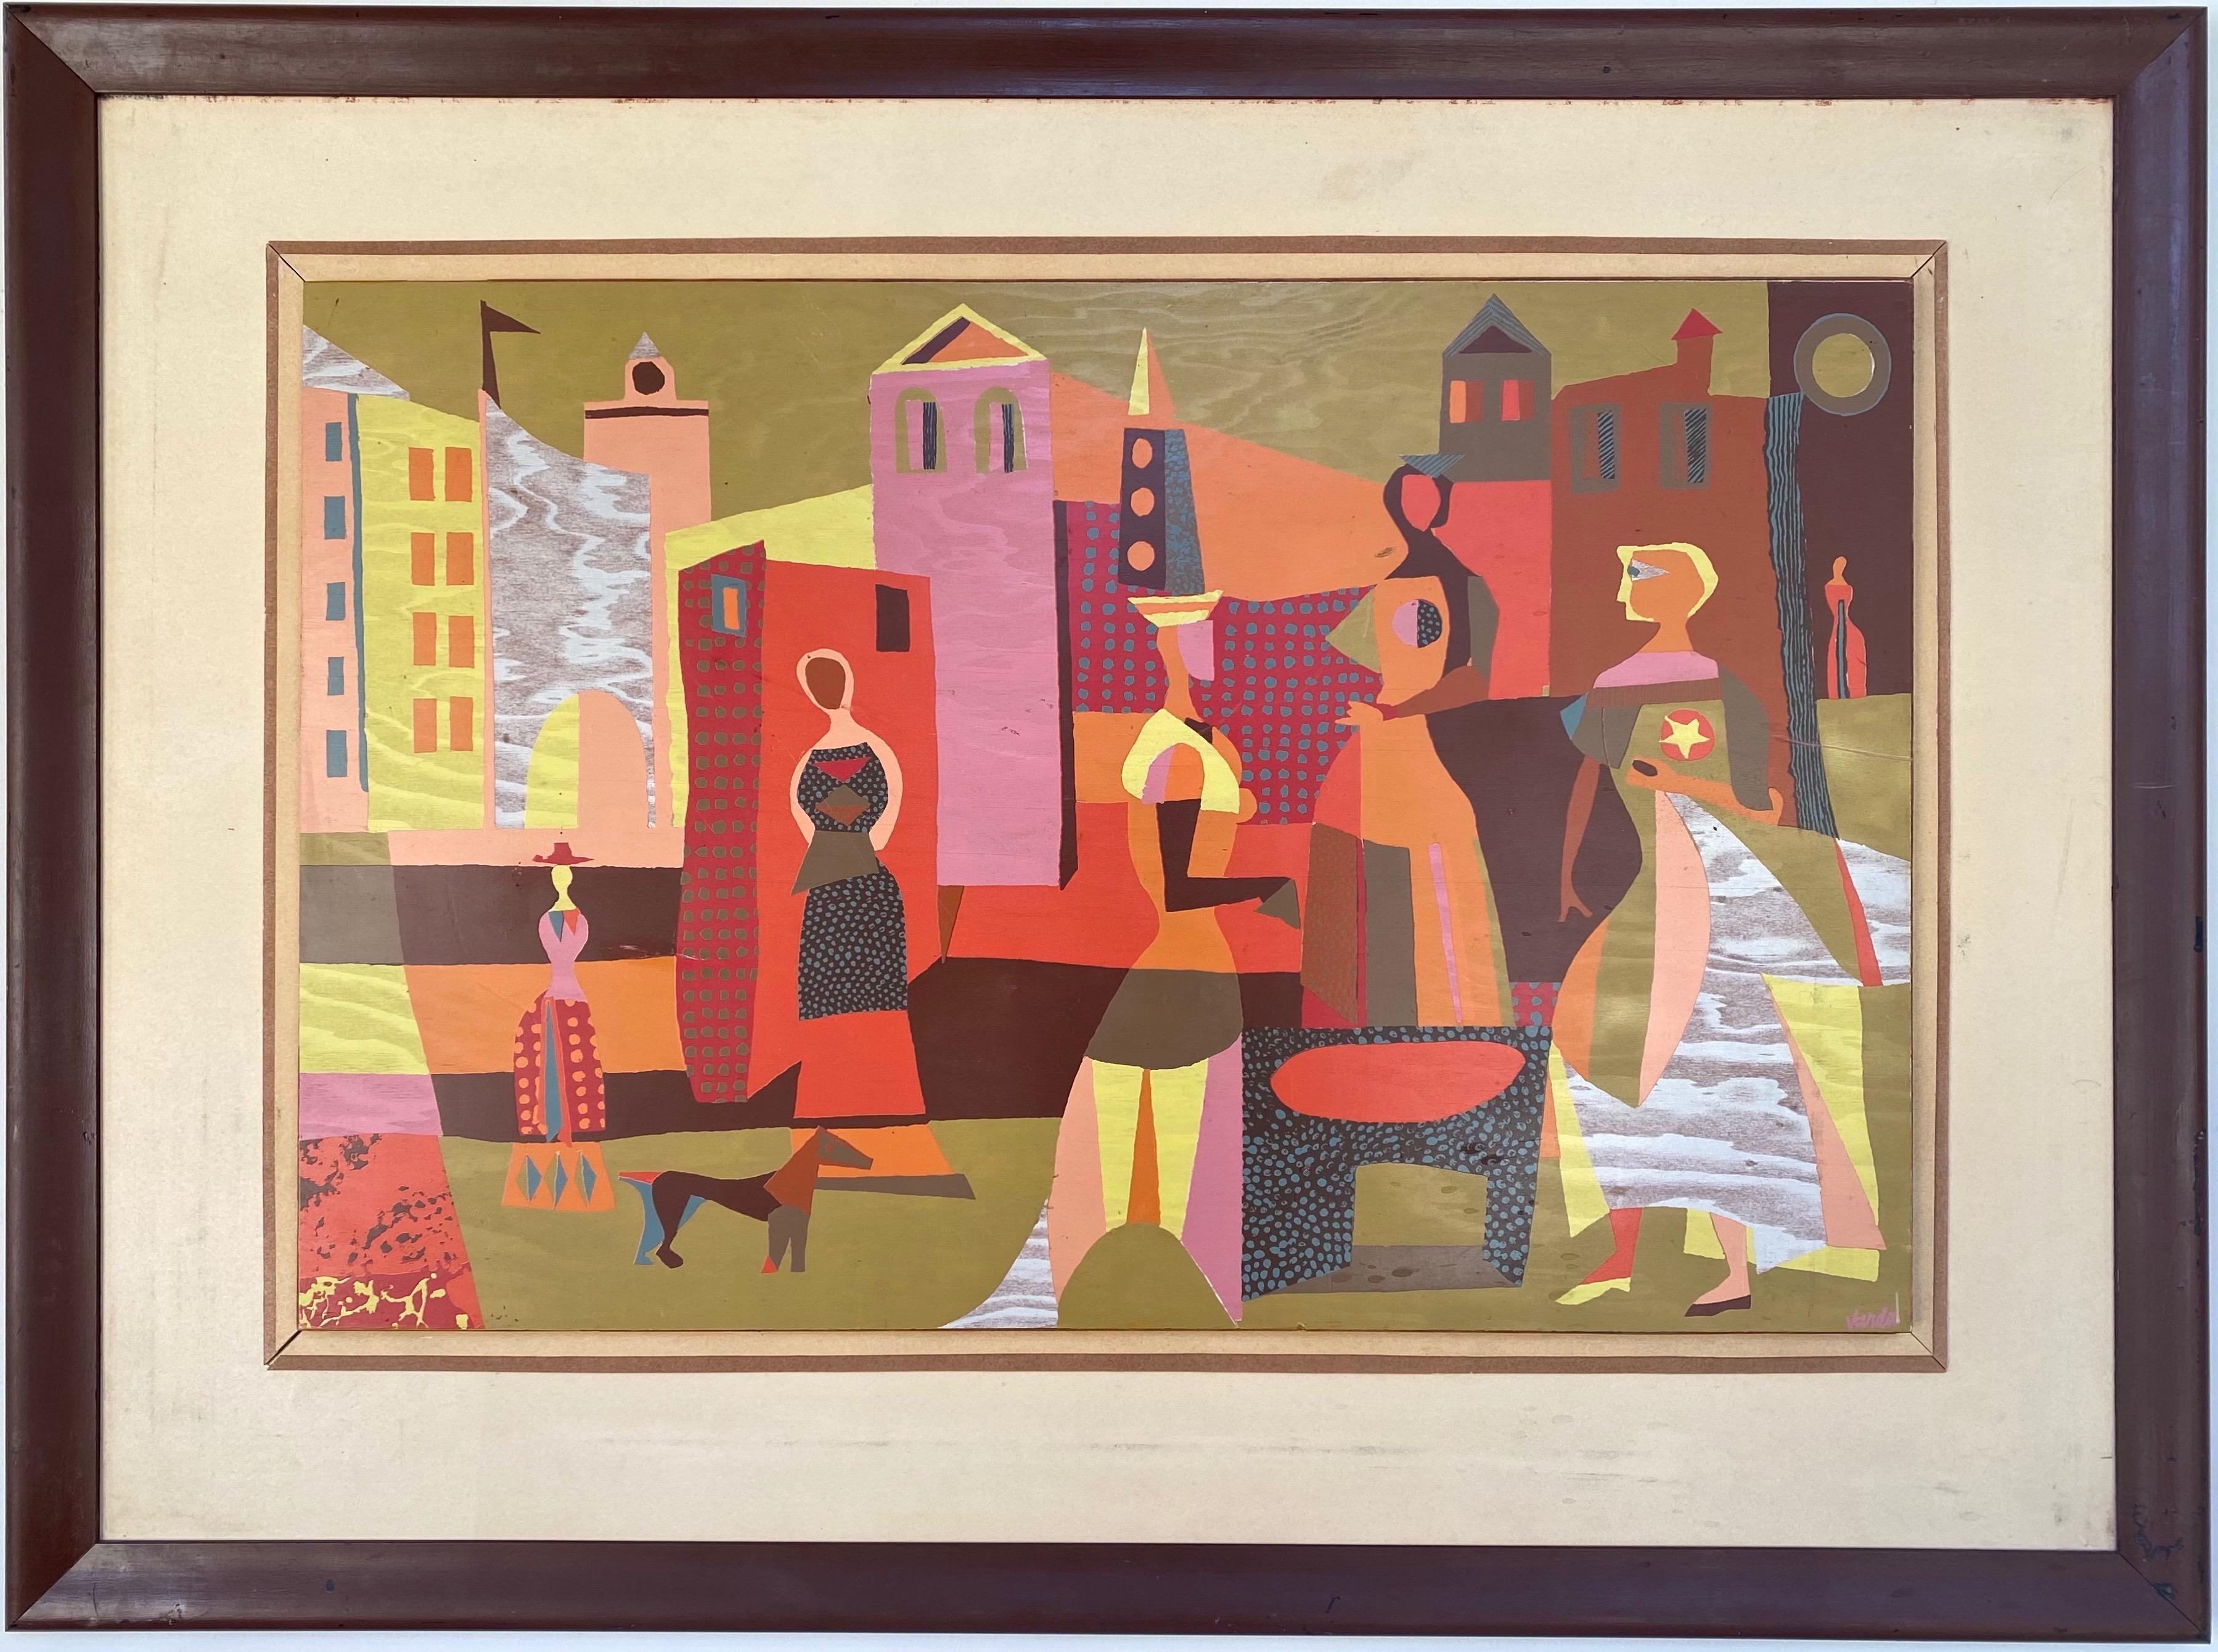 A delightful 1950s signed lithograph on plywood of an untitled abstract expressionist collage by important mid-century Northern California artist Jean Varda.

A sextet of sophisticated women dressed to the nines are shown out and about on the